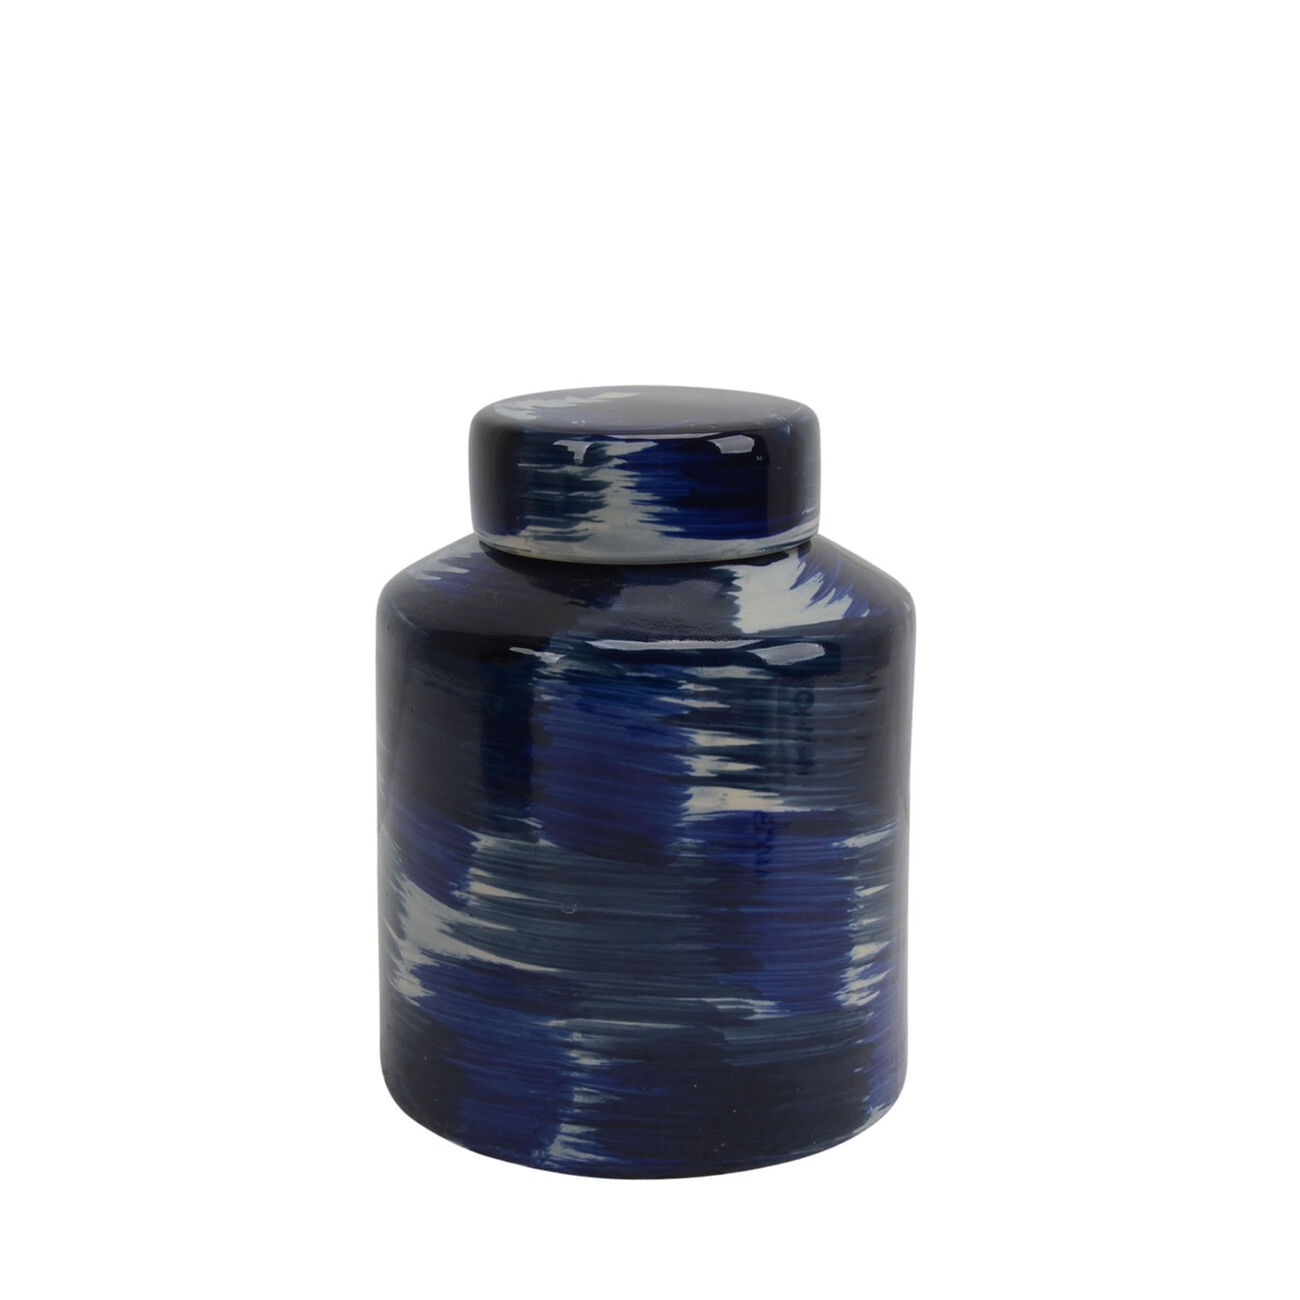 Ceramic Lidded Jar with Textured Pattern, Small, Black and Blue